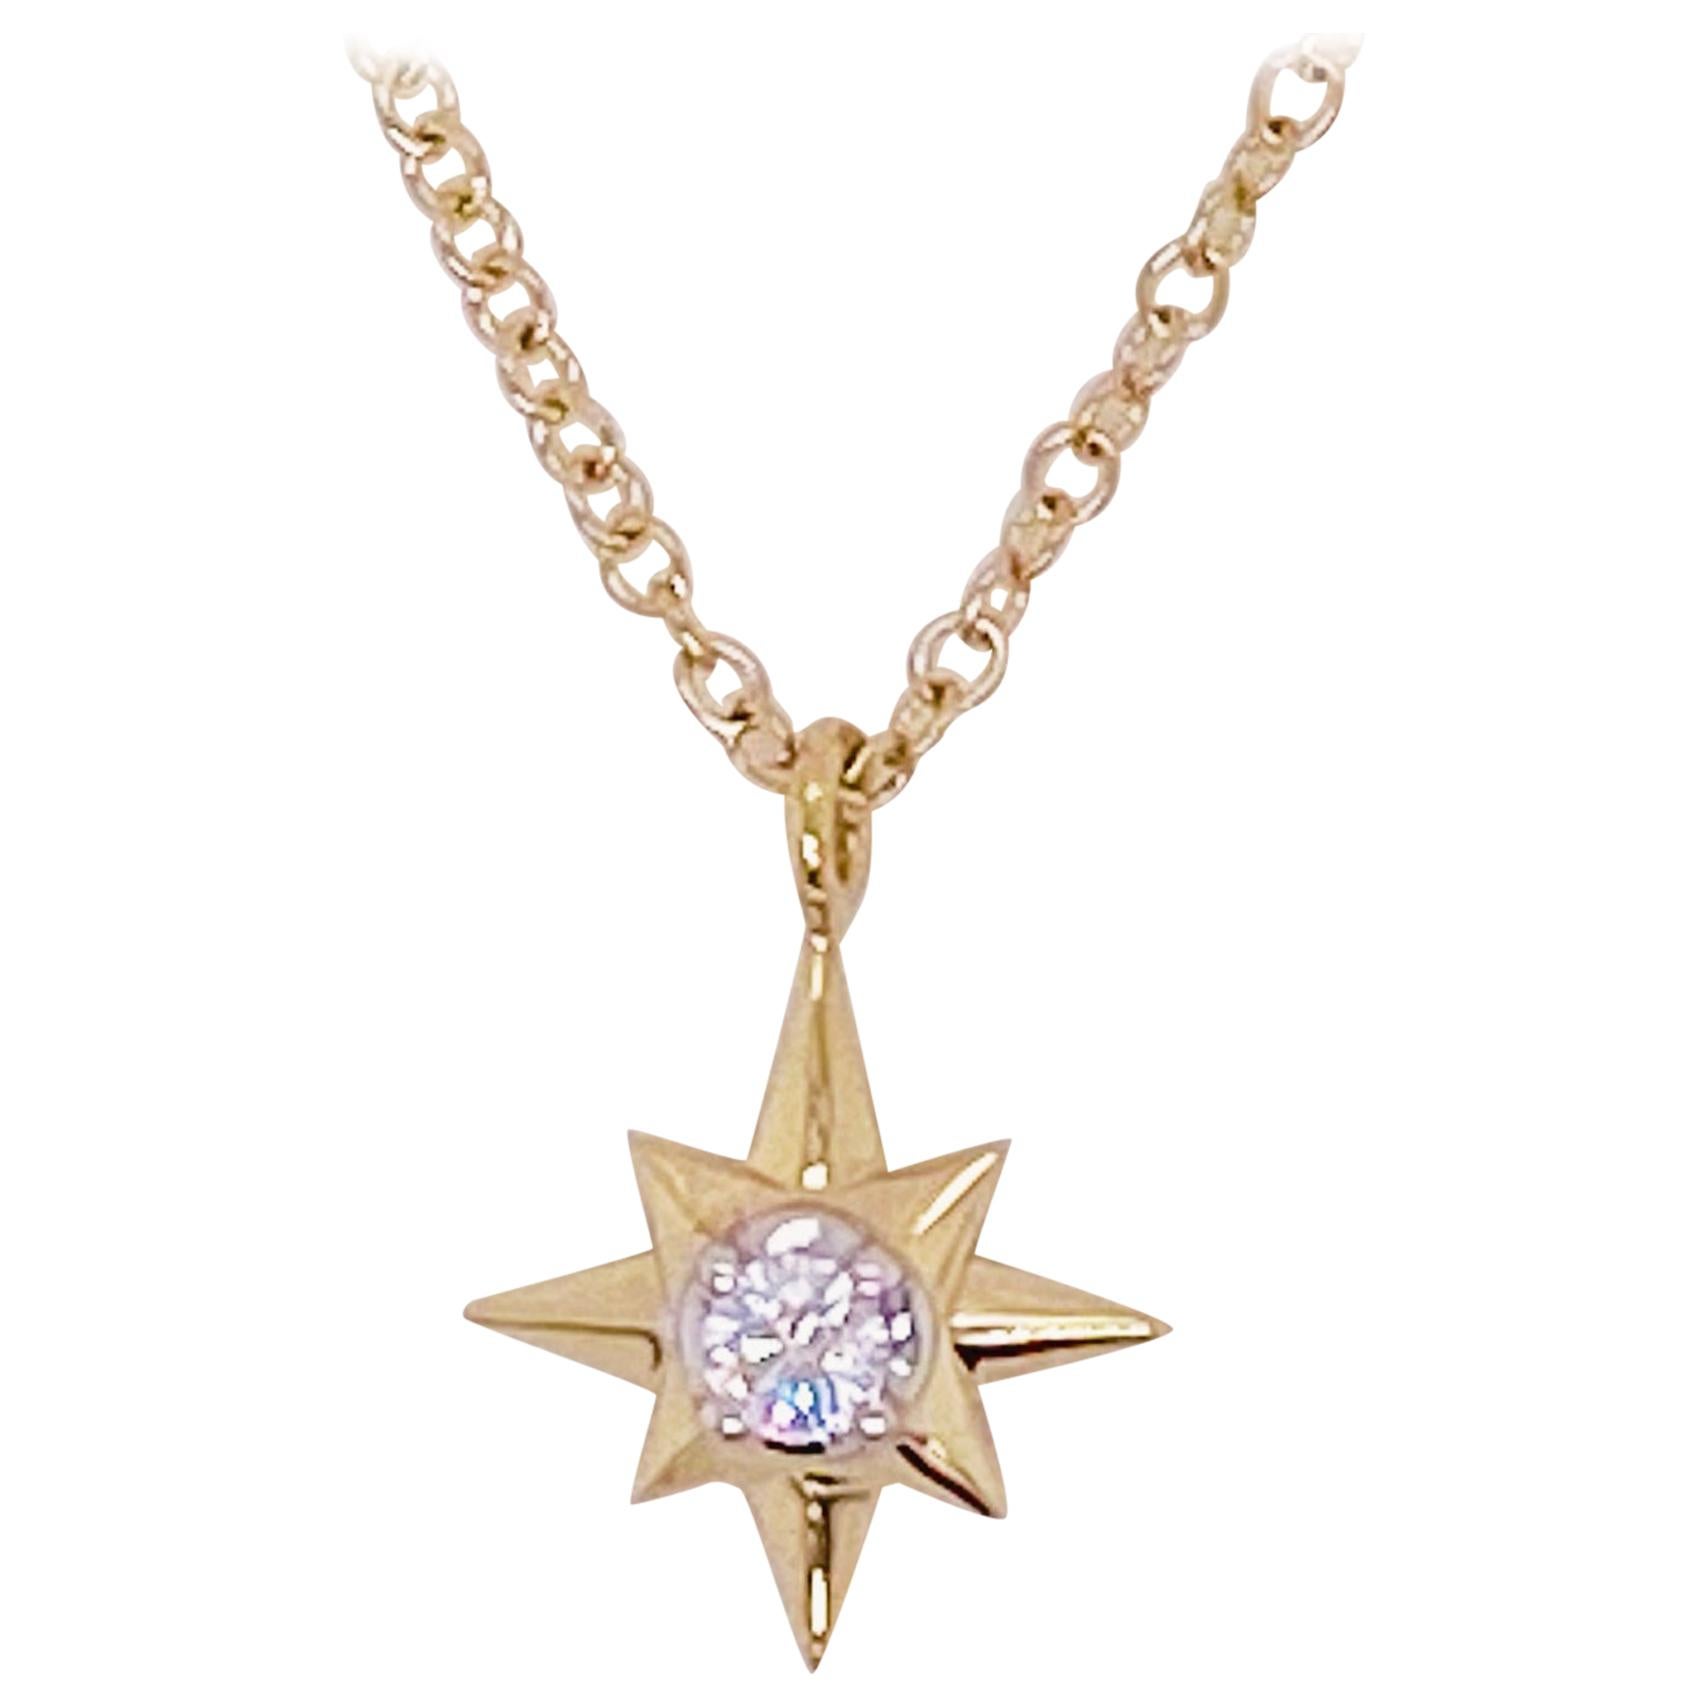 Diamond Star Necklace, 14 Karat Yellow Gold, North Star Pendant Necklace For Sale